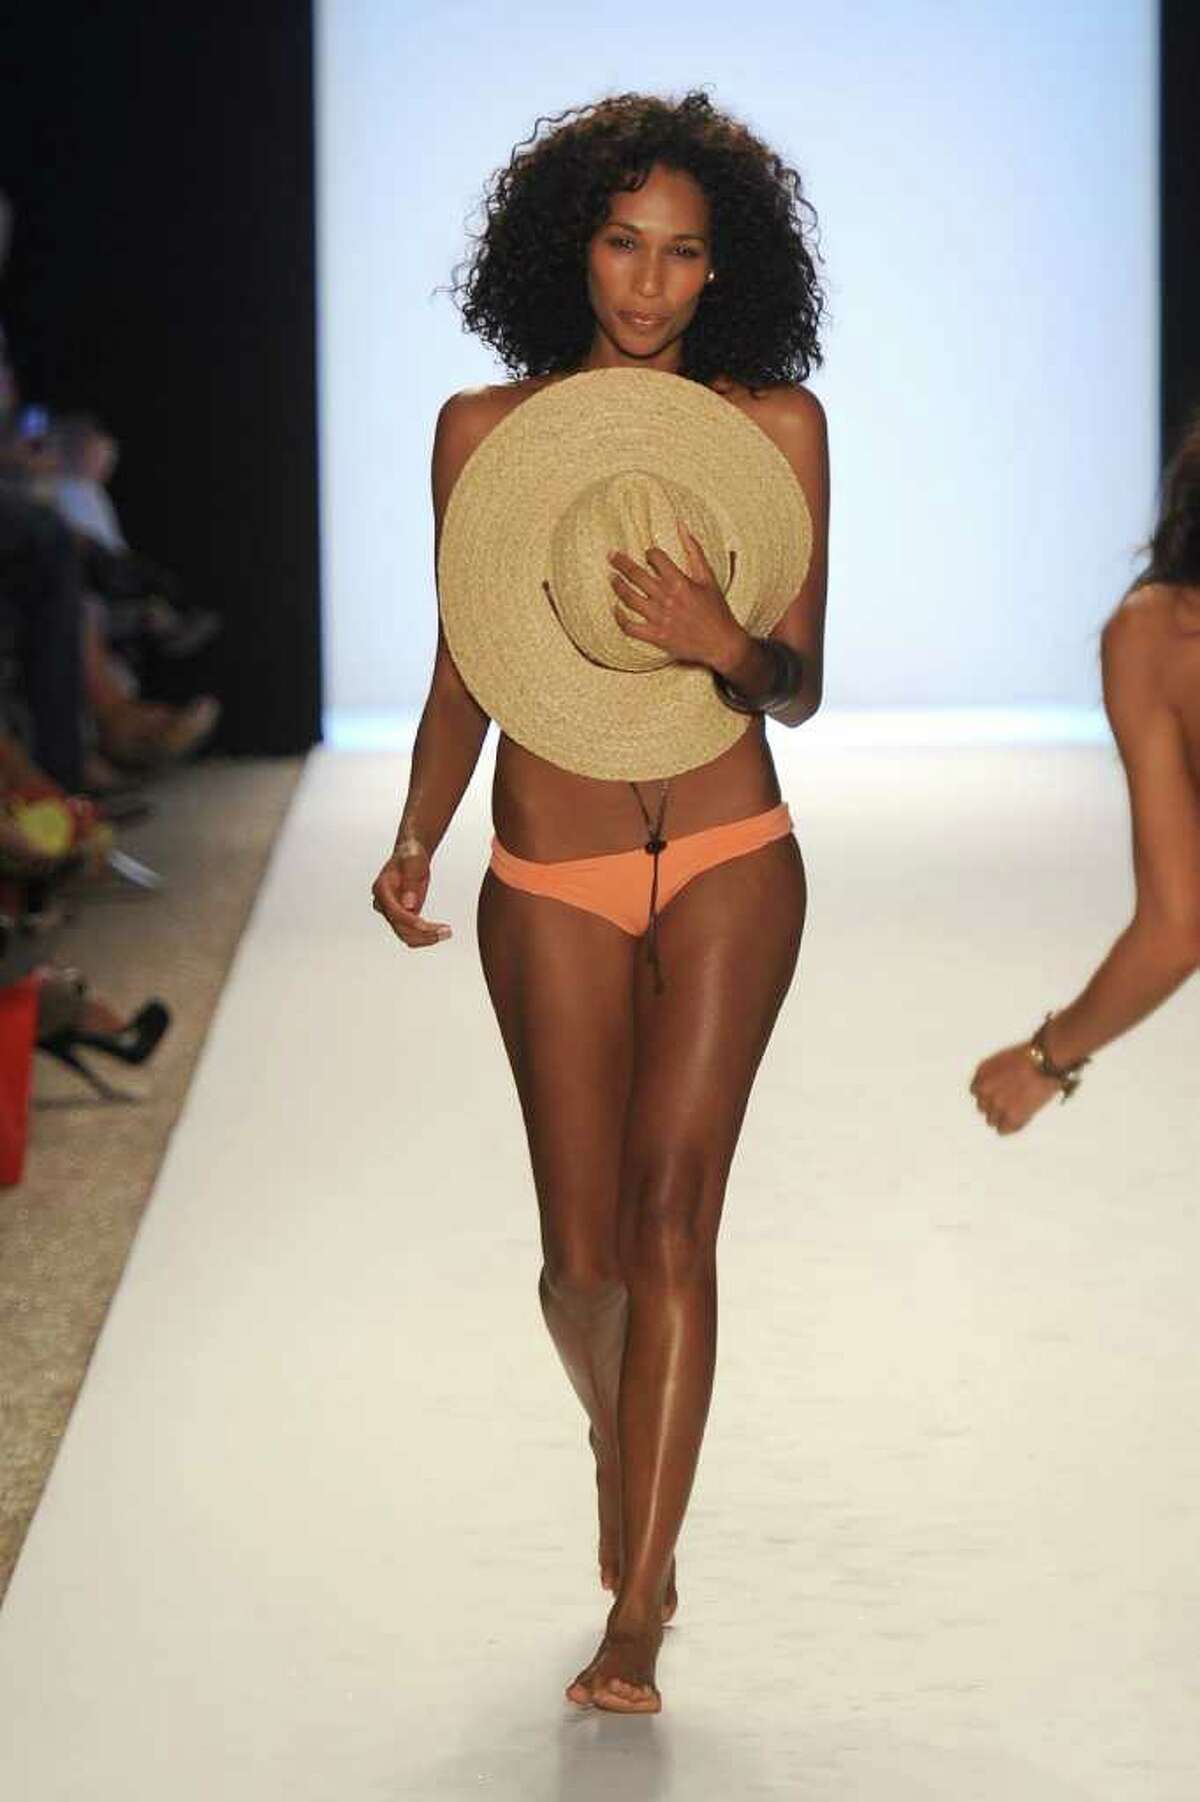 A model walks the runway at the L*SPACE BY MONICA WISE show during Mercedes-Benz Fashion Week Swim at The Raleigh in Miami Beach, Fla., on Friday, July 15, 2011.